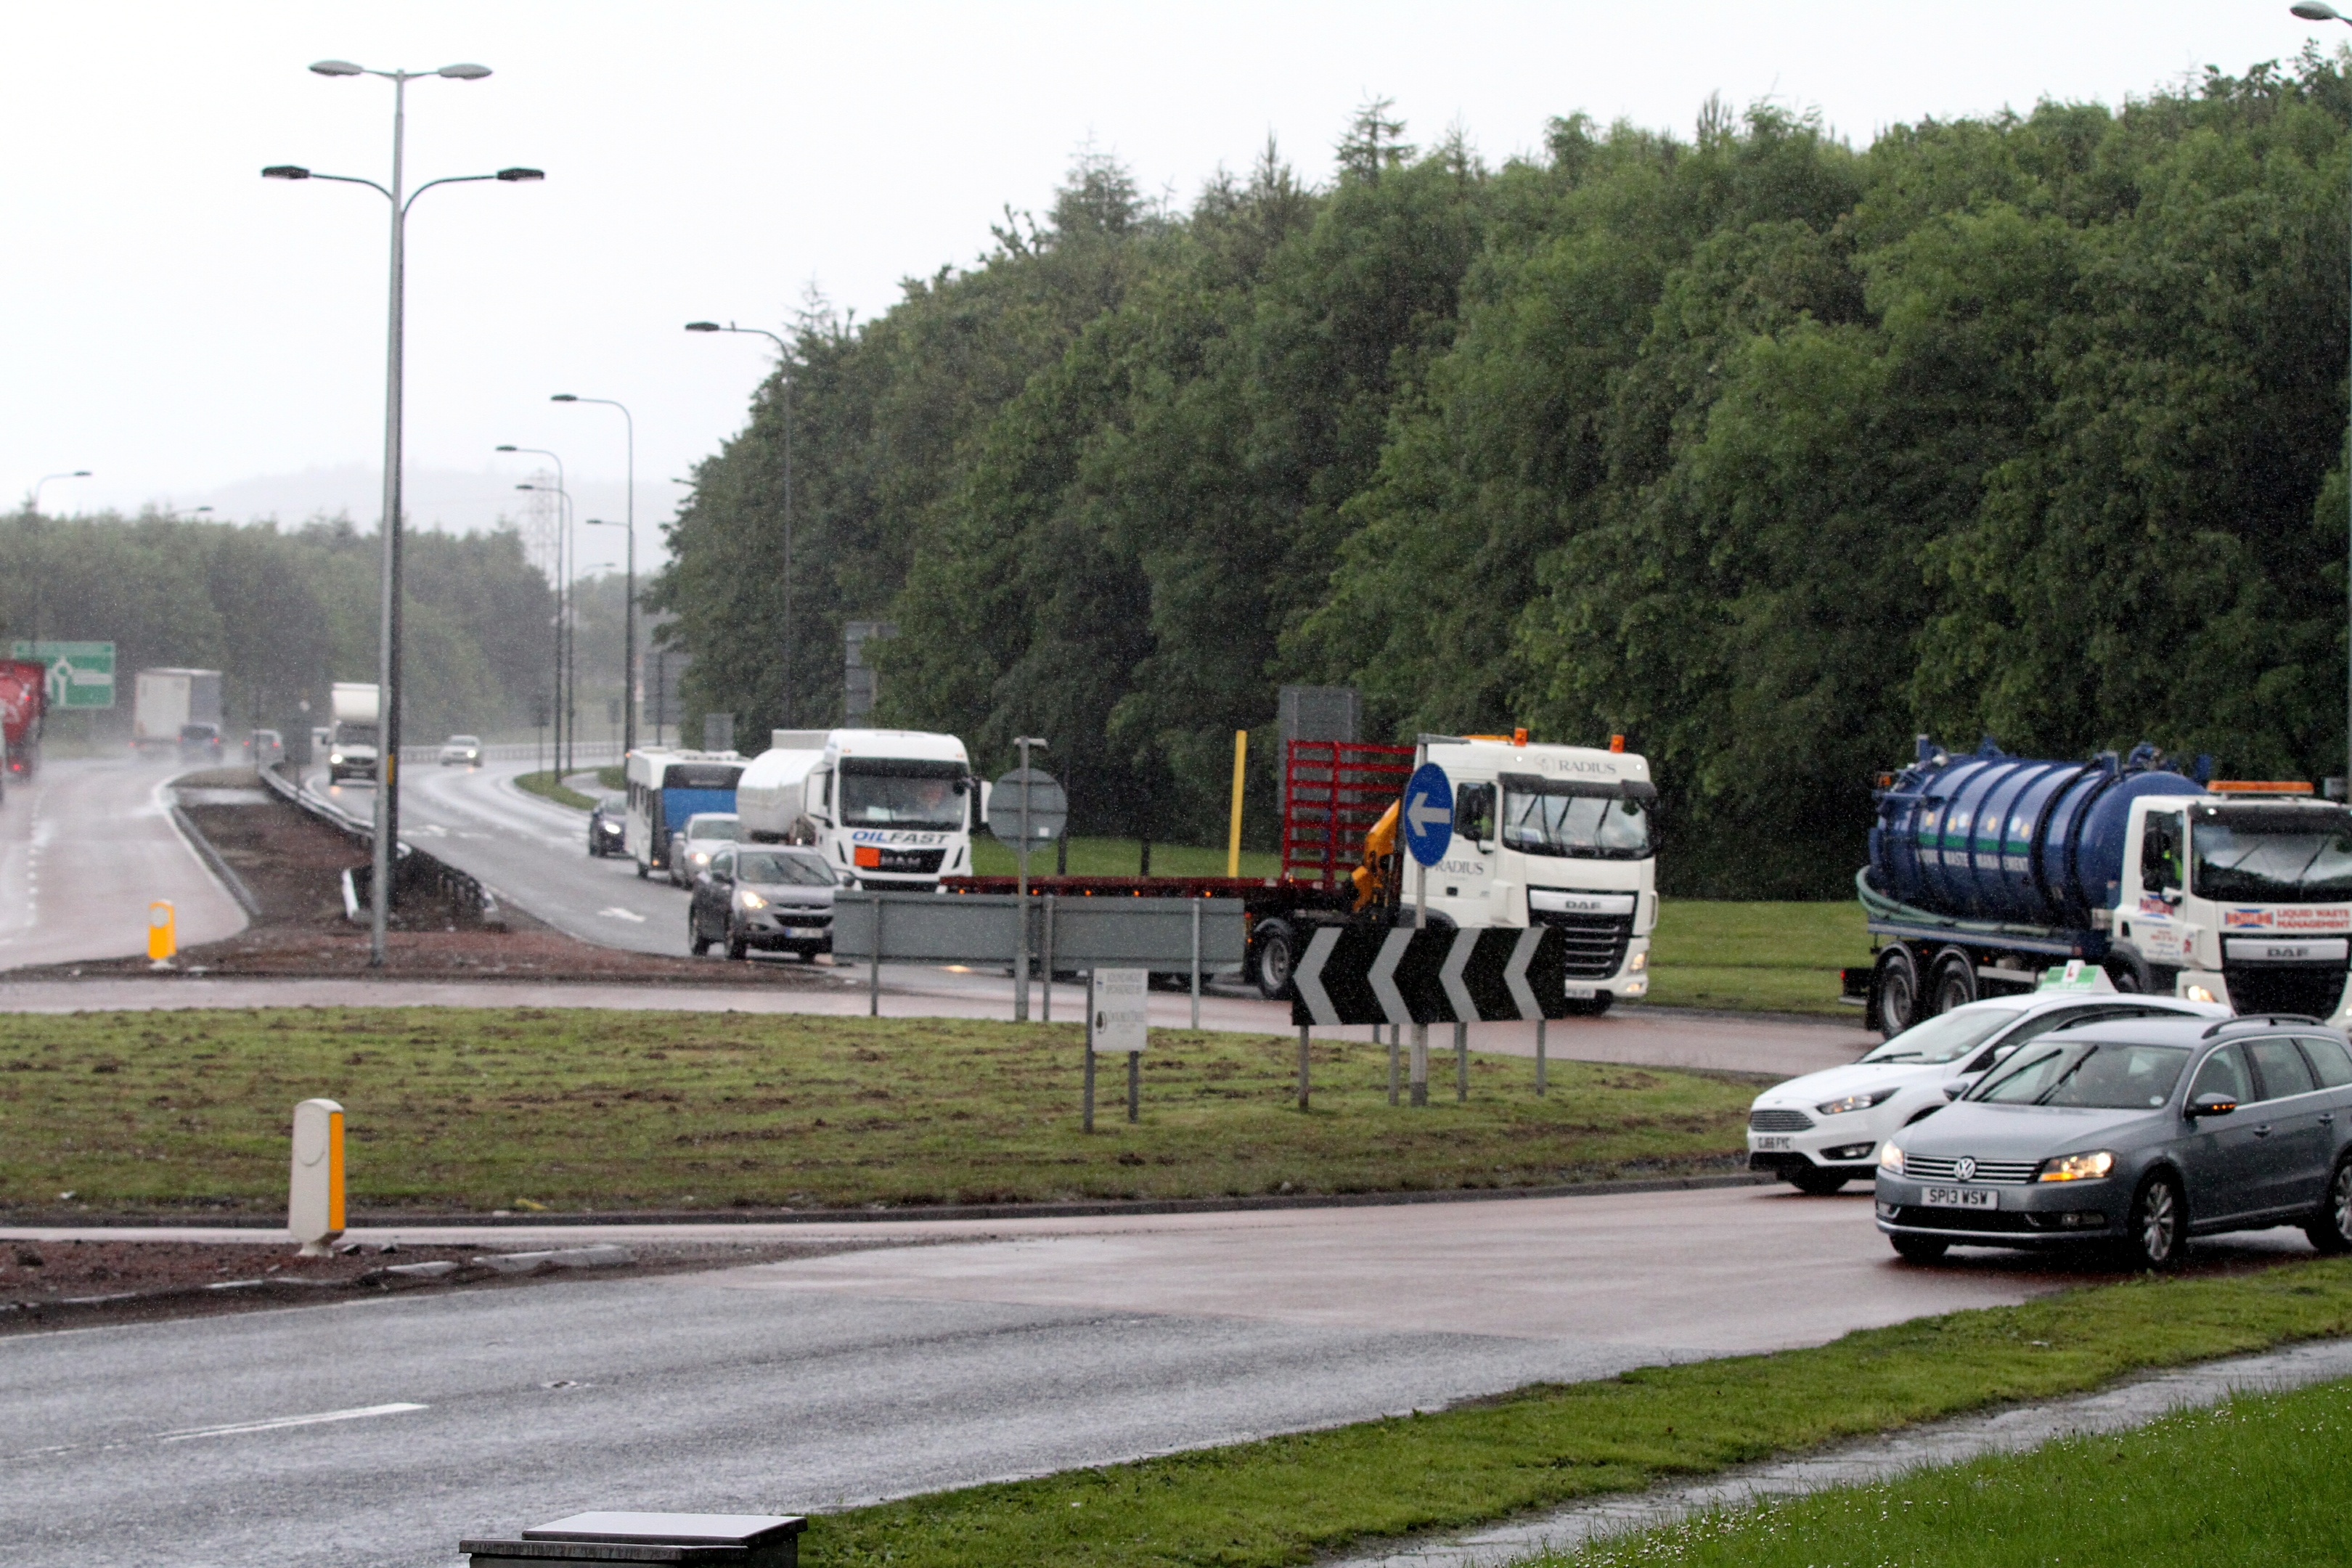 The drug couriers' car was stopped at the Swallow Roundabout after their journey from Liverpool.